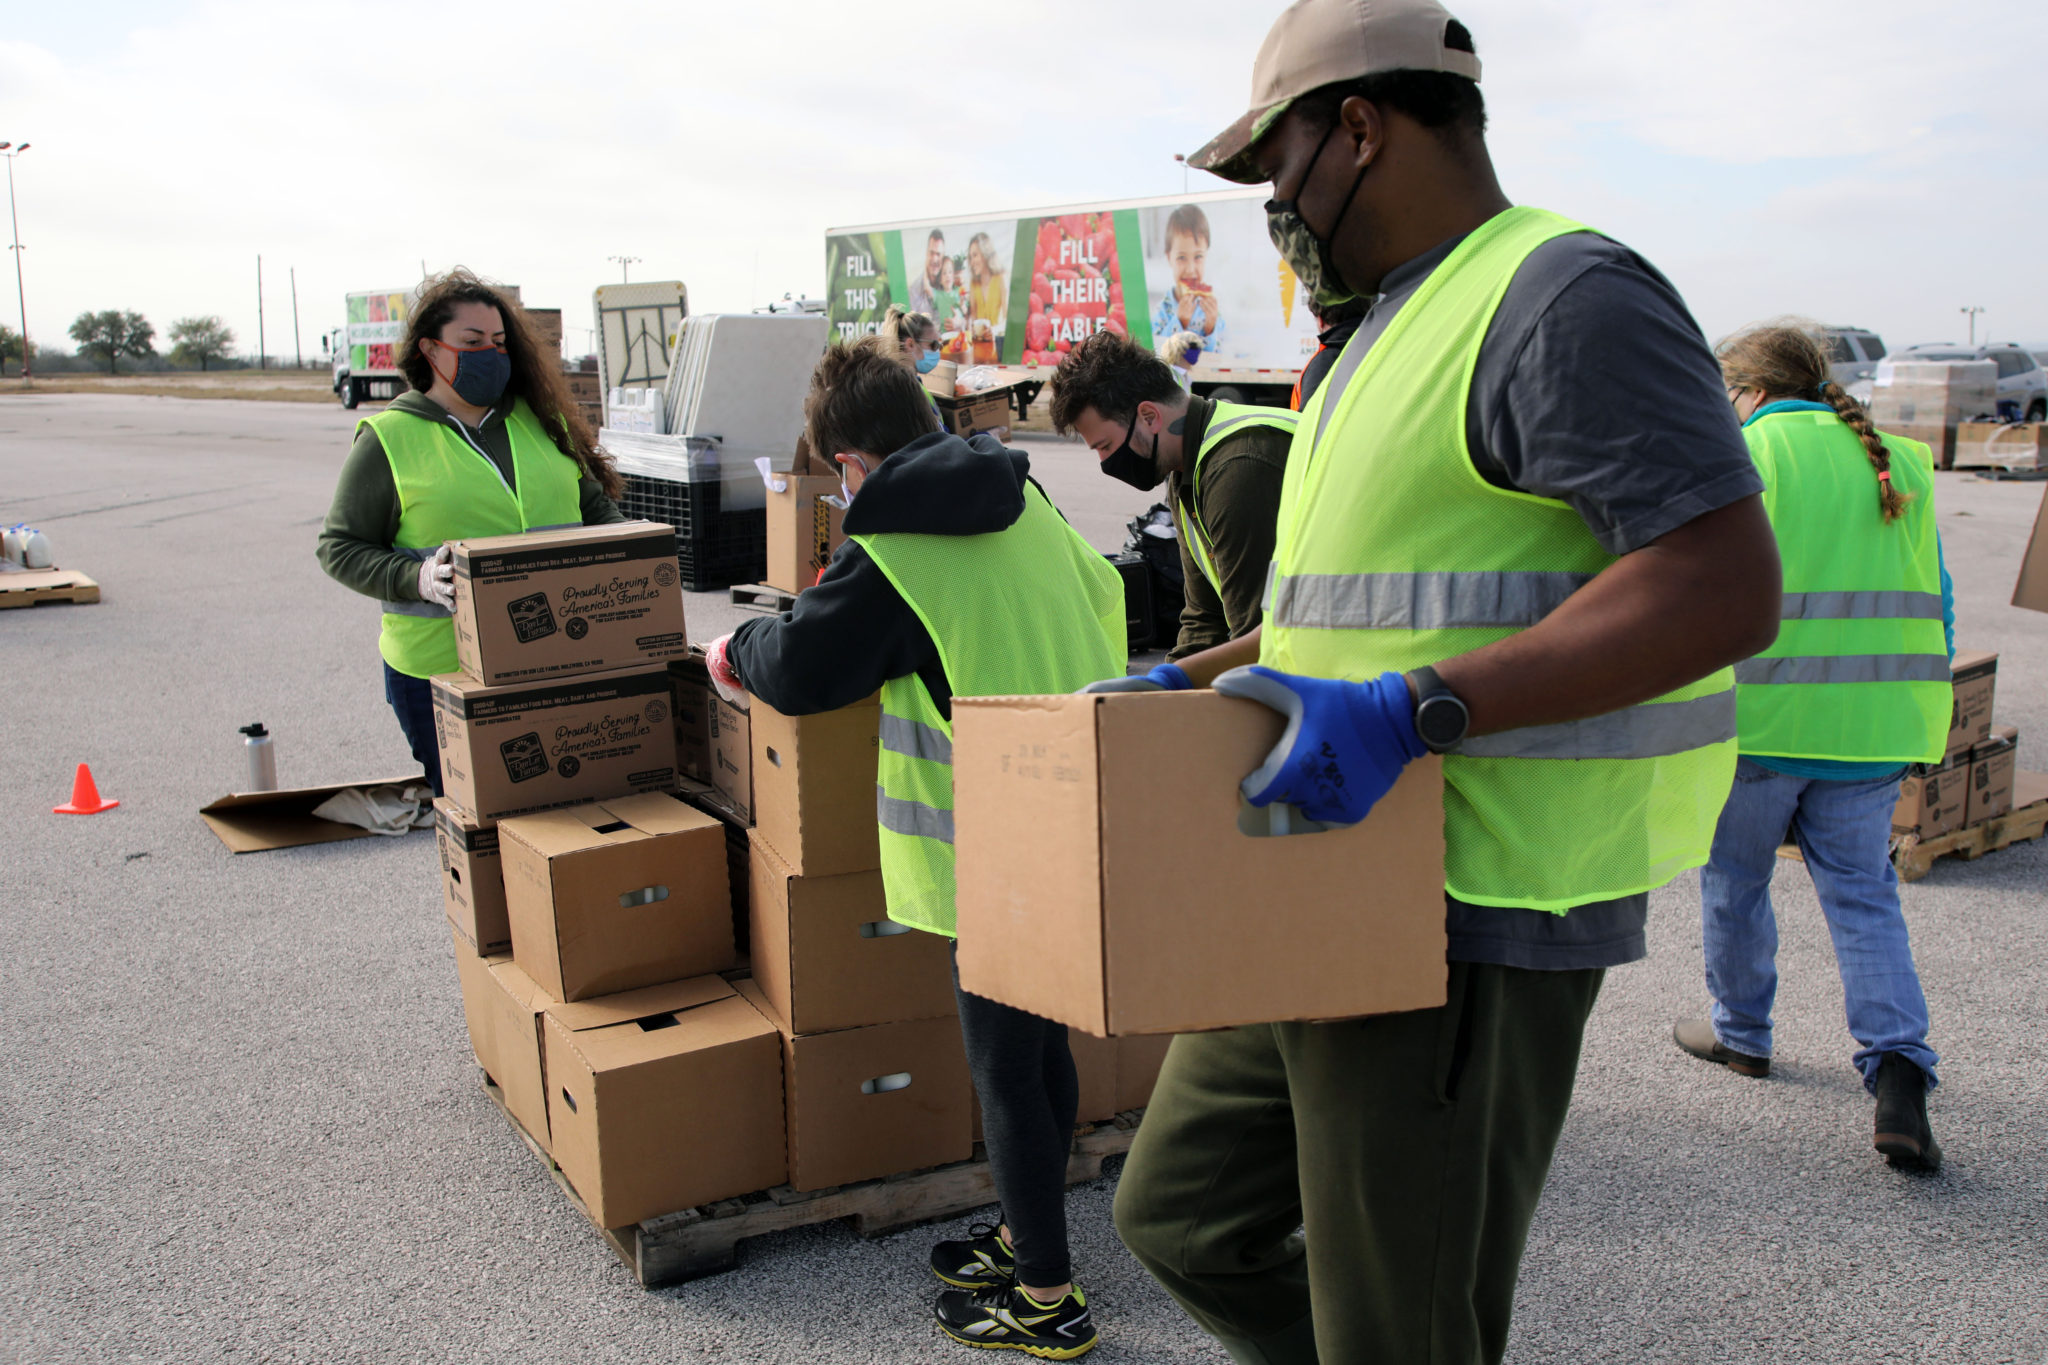 Austin, TX - Volunteers organize emergency food aid being distributed by the Central Texas Food Bank to people in need at a drive through event at the Exposition Center.